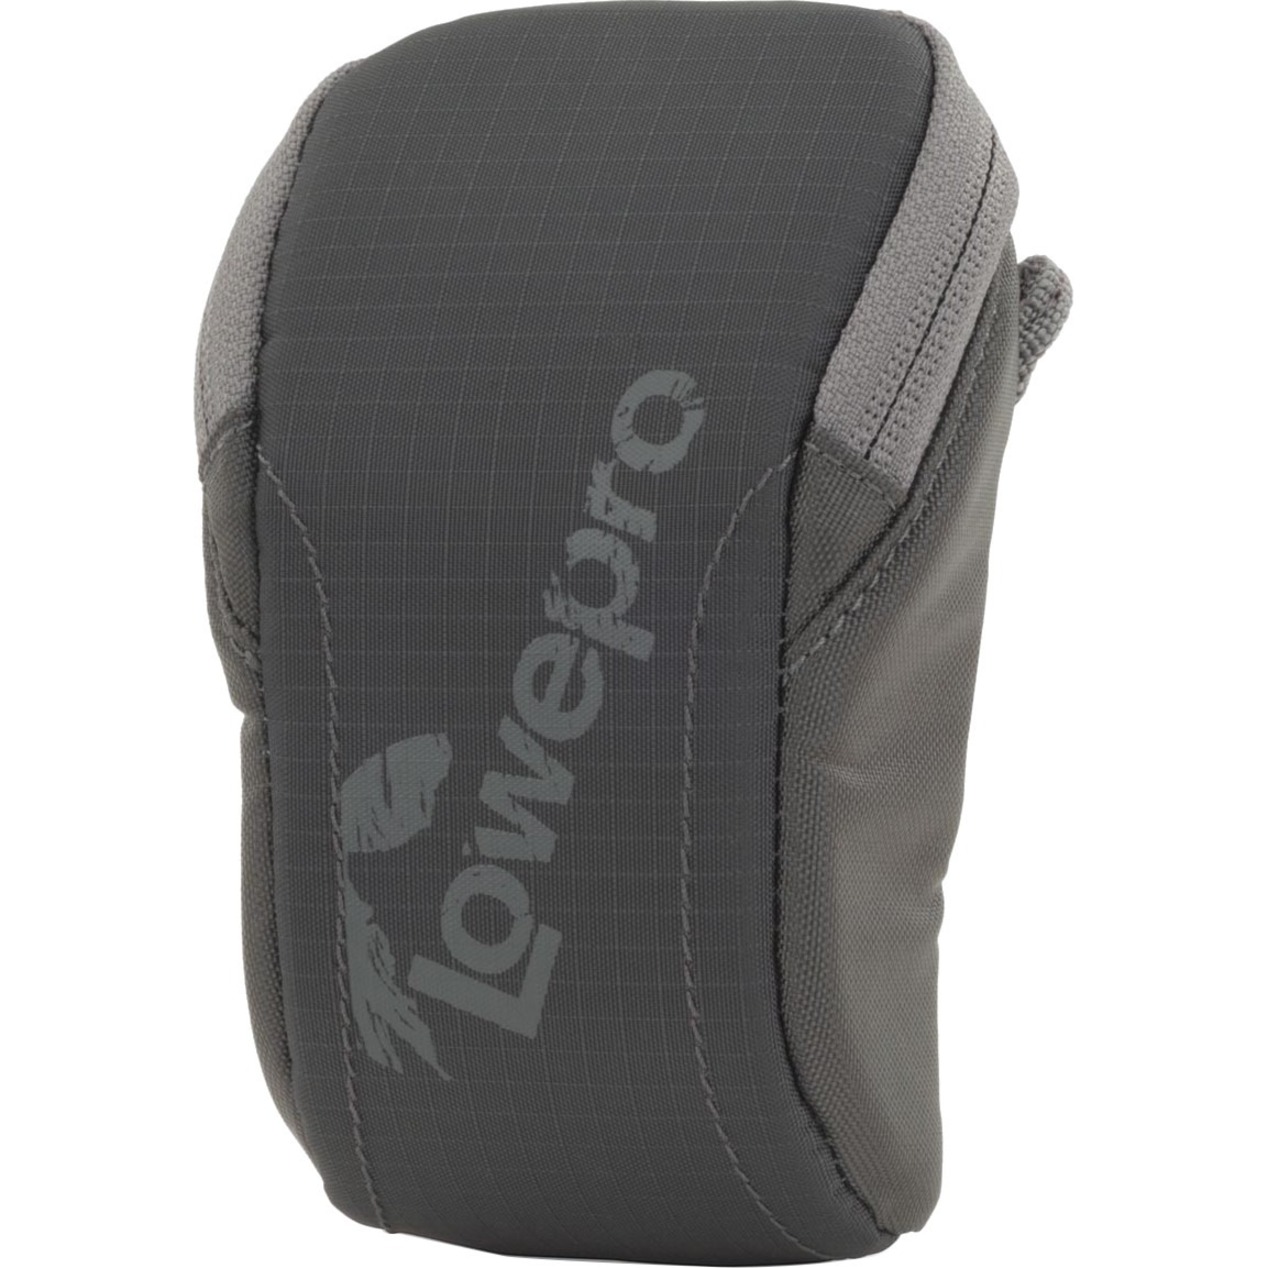 Lowepro Dashpoint Carrying Case (Pouch) Camera, Gray - image 2 of 2